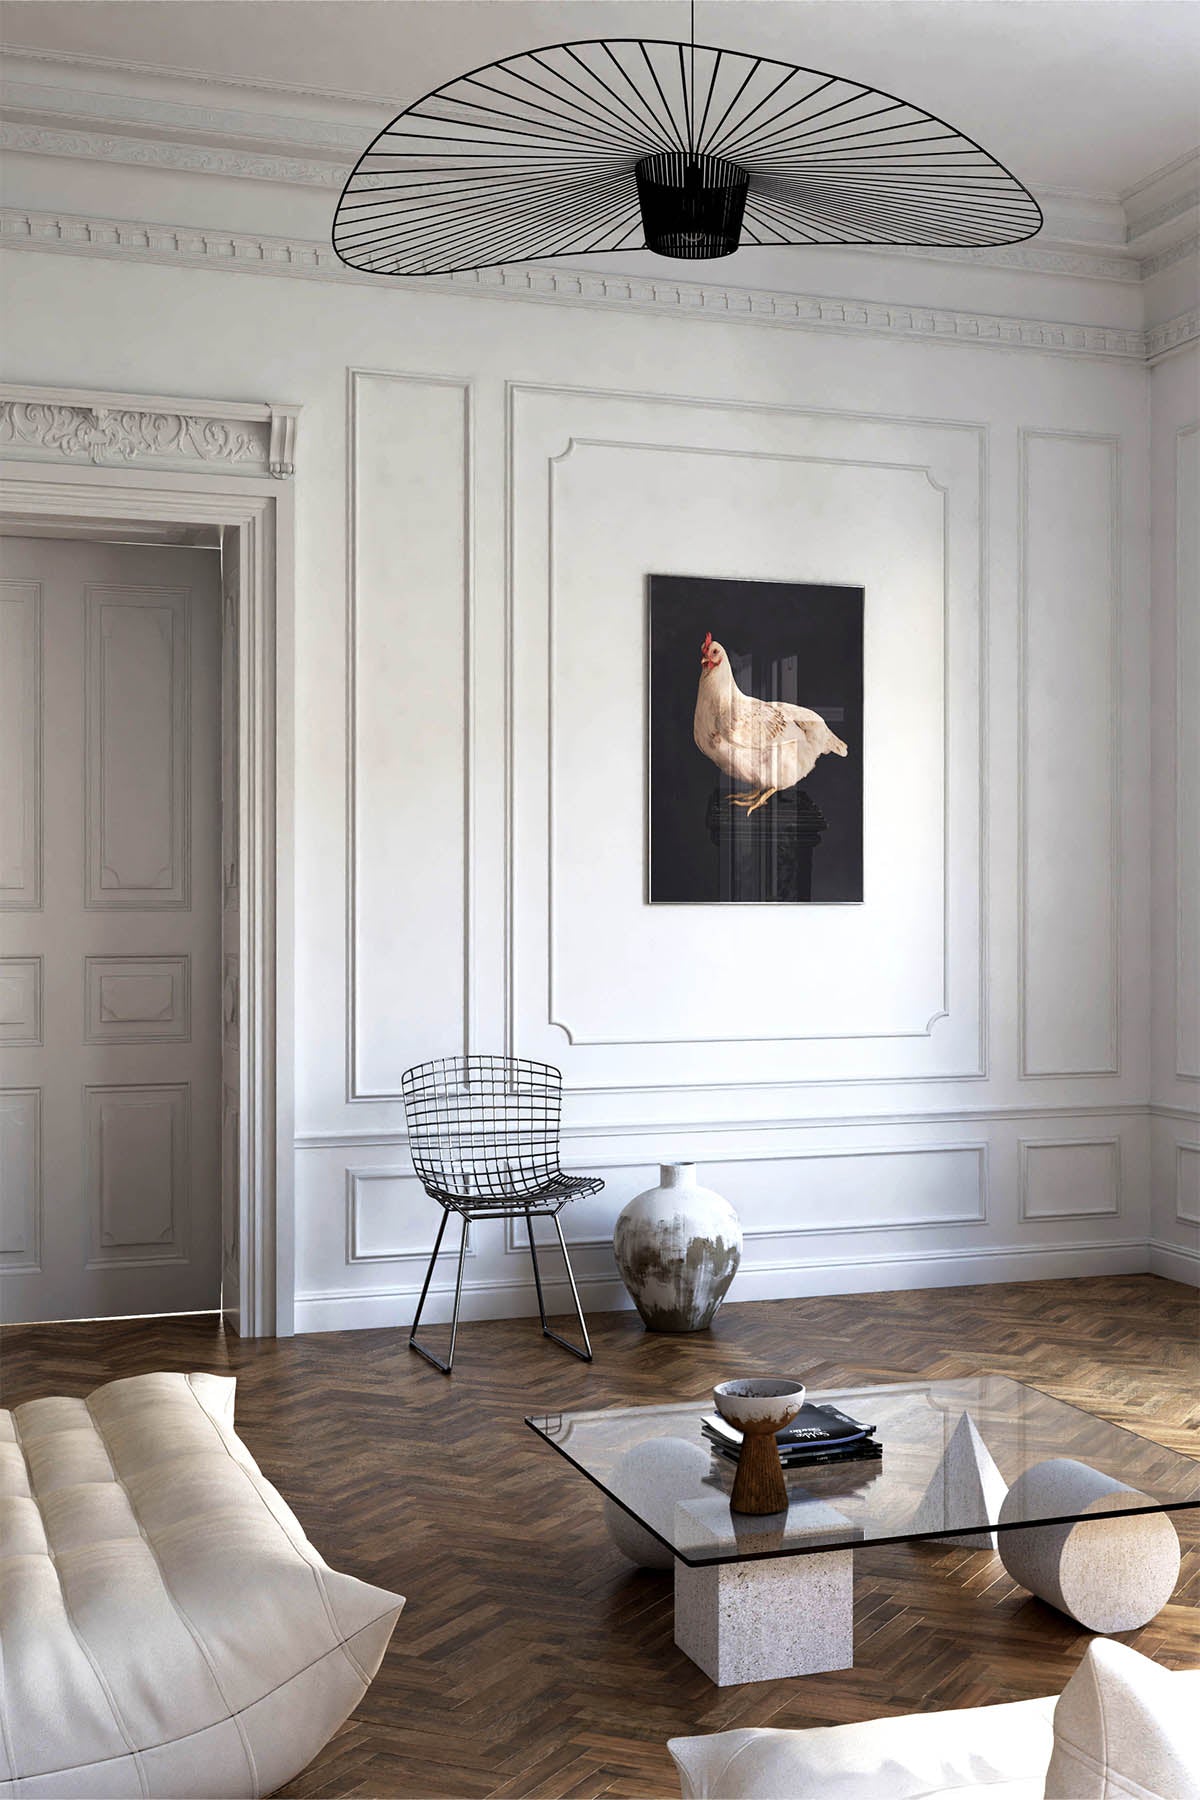 Fine Art Print Of A White Chicken Standing On A Black Plinth With A Black Background Framed On A Wall In An European Style Entry Way or Living Room Near A Harry Bertoia Mid Century Wire Chair and Cream Linge Roset Couch.